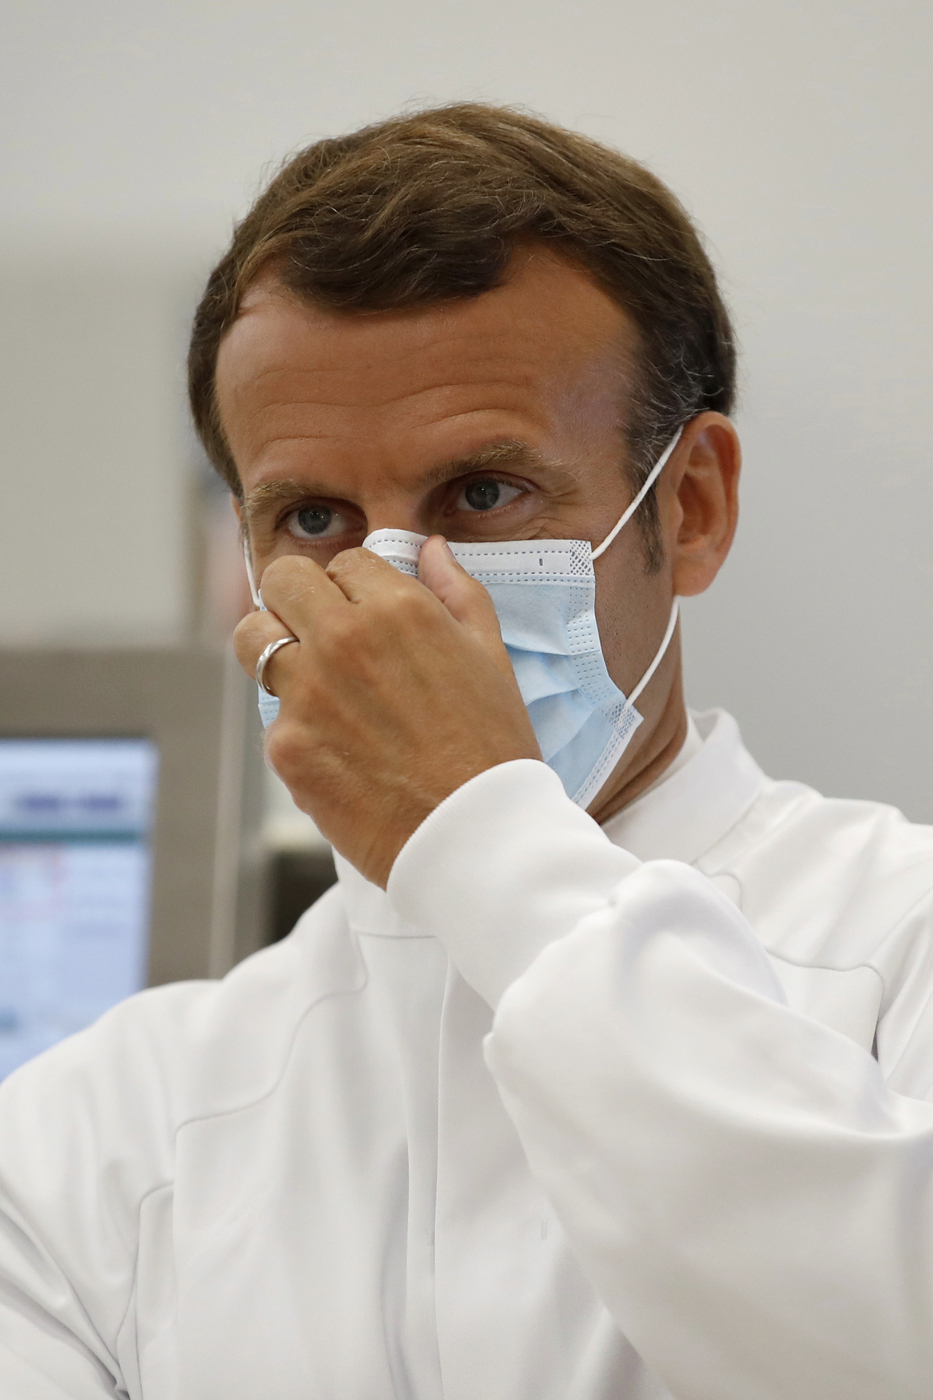 French President Emmanuel Macron adjusts his protective face mask as he visits an industrial development laboratory at the French drugmaker's vaccine unit Sanofi Pasteur plant in Marcy-l'Etoile, near Lyon, central France, Tuesday, June 16, 2020. The visit comes after rival pharmaceutical company AstraZeneca this weekend announced a deal to supply 400 million vaccine doses to EU countries, including France. (Gonzalo Fuentes/Pool via AP)